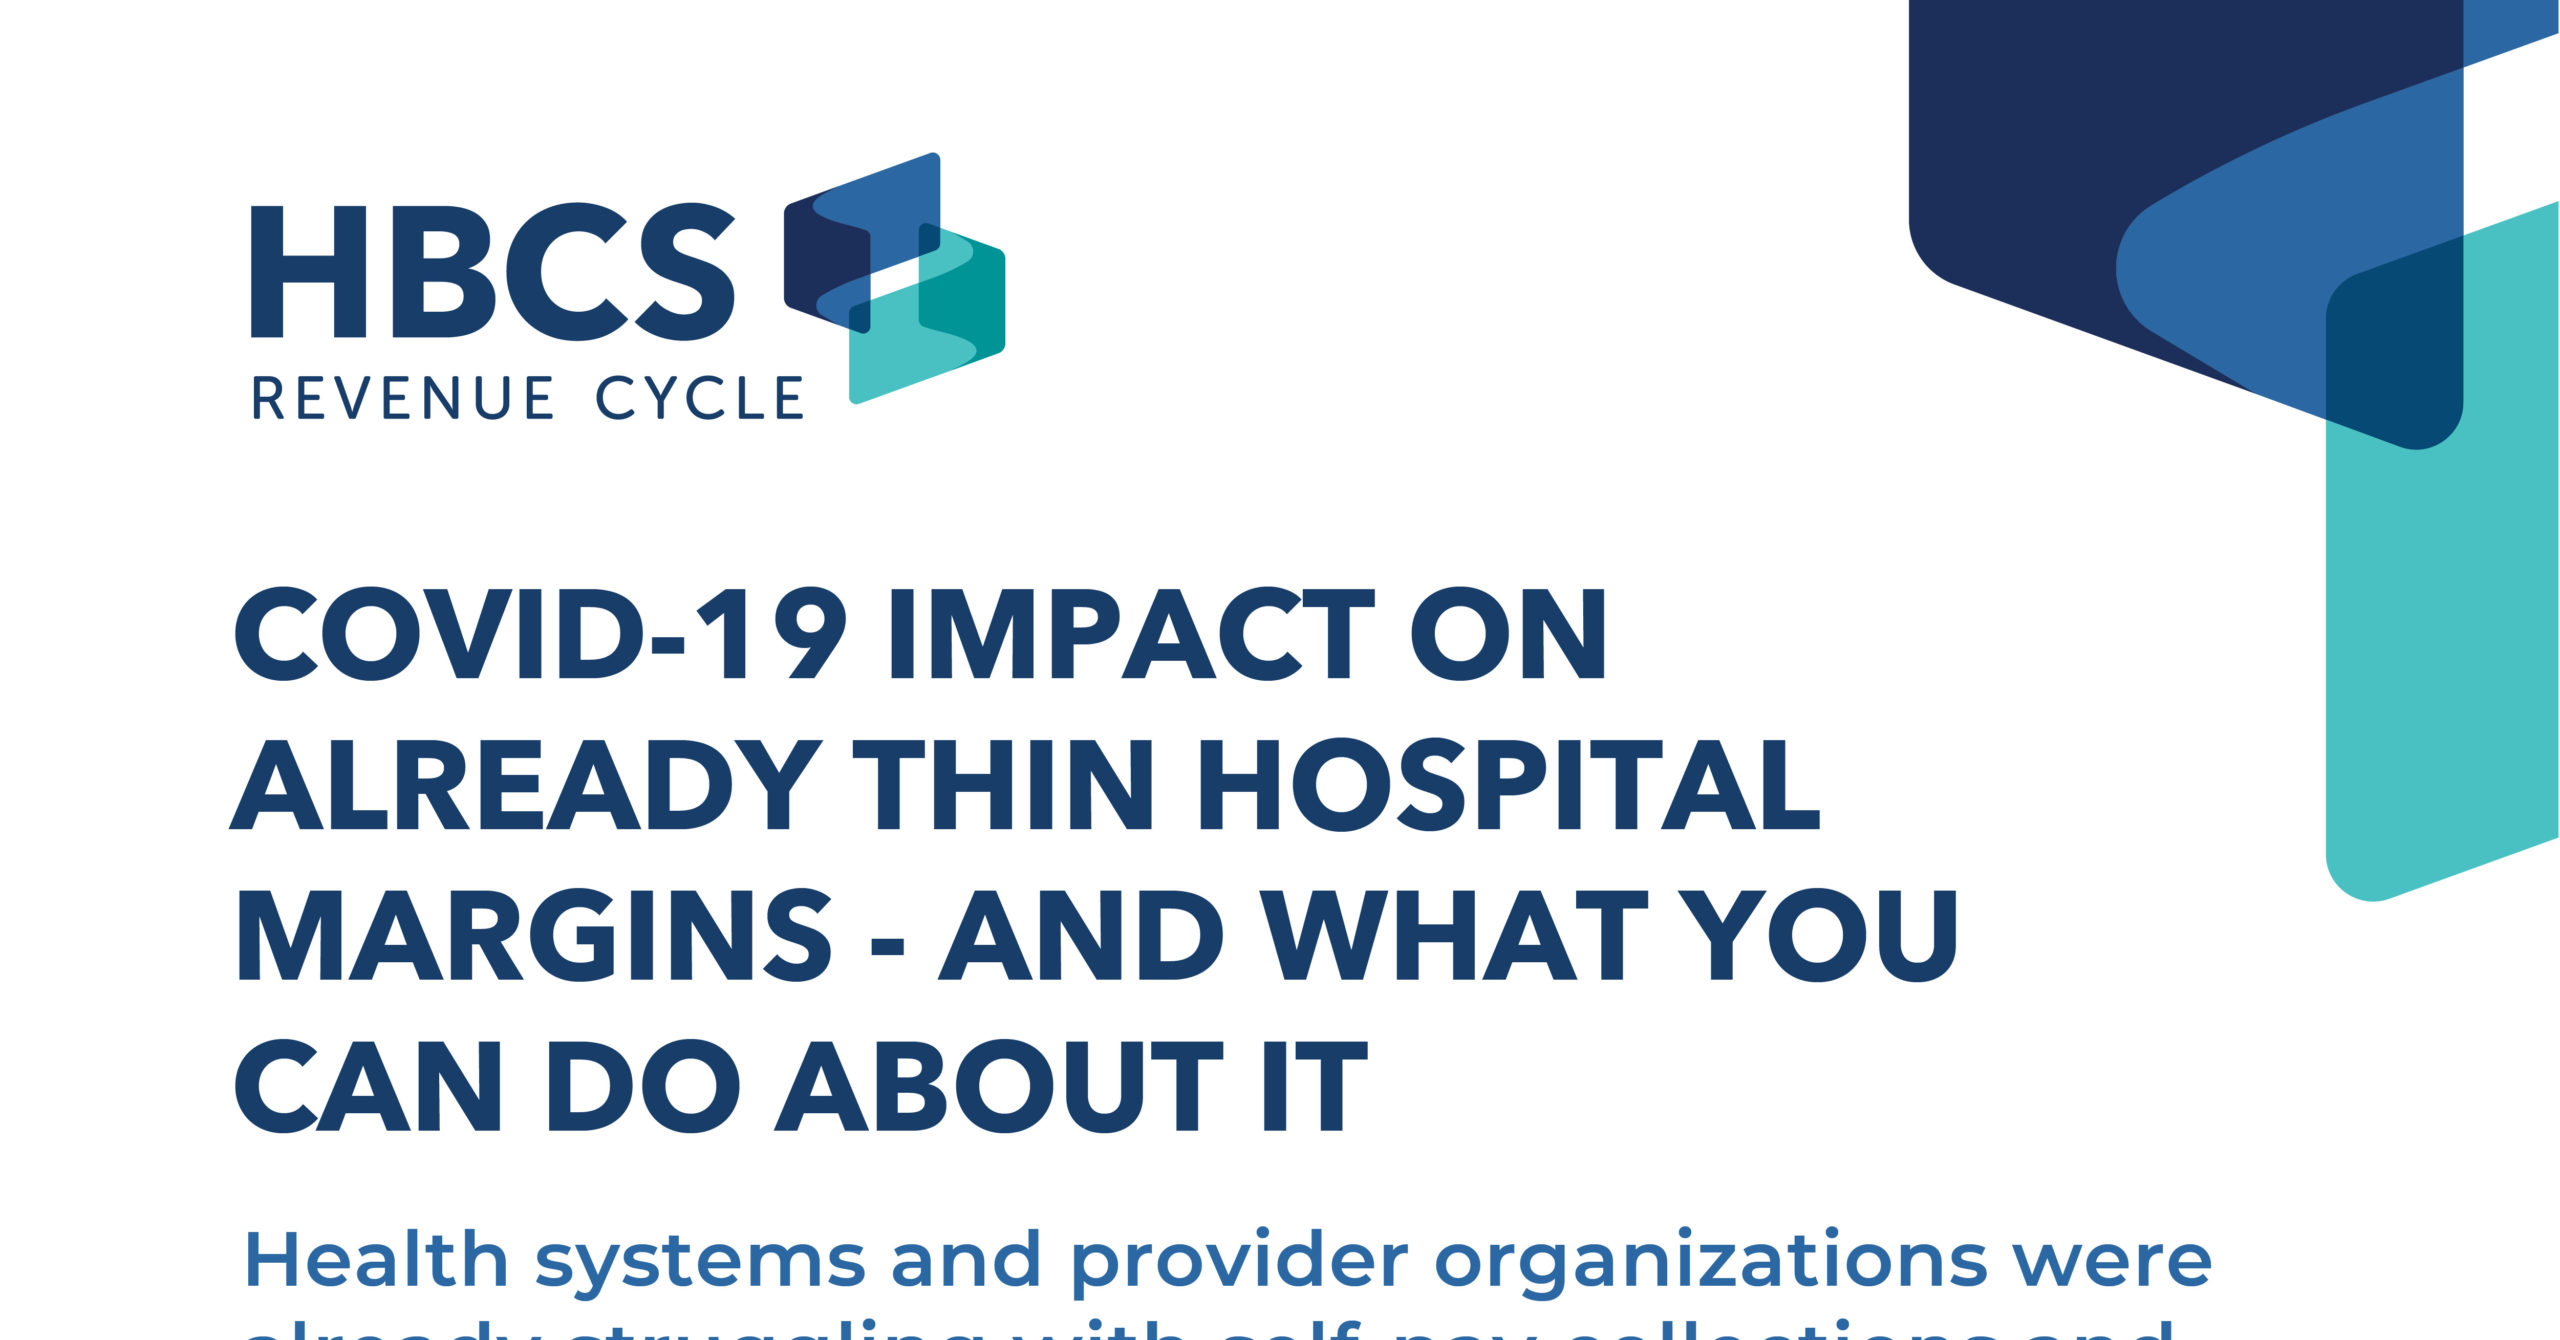 COVID-19 Impact on Already Thin Hospital Margins – and What You Can Do About It